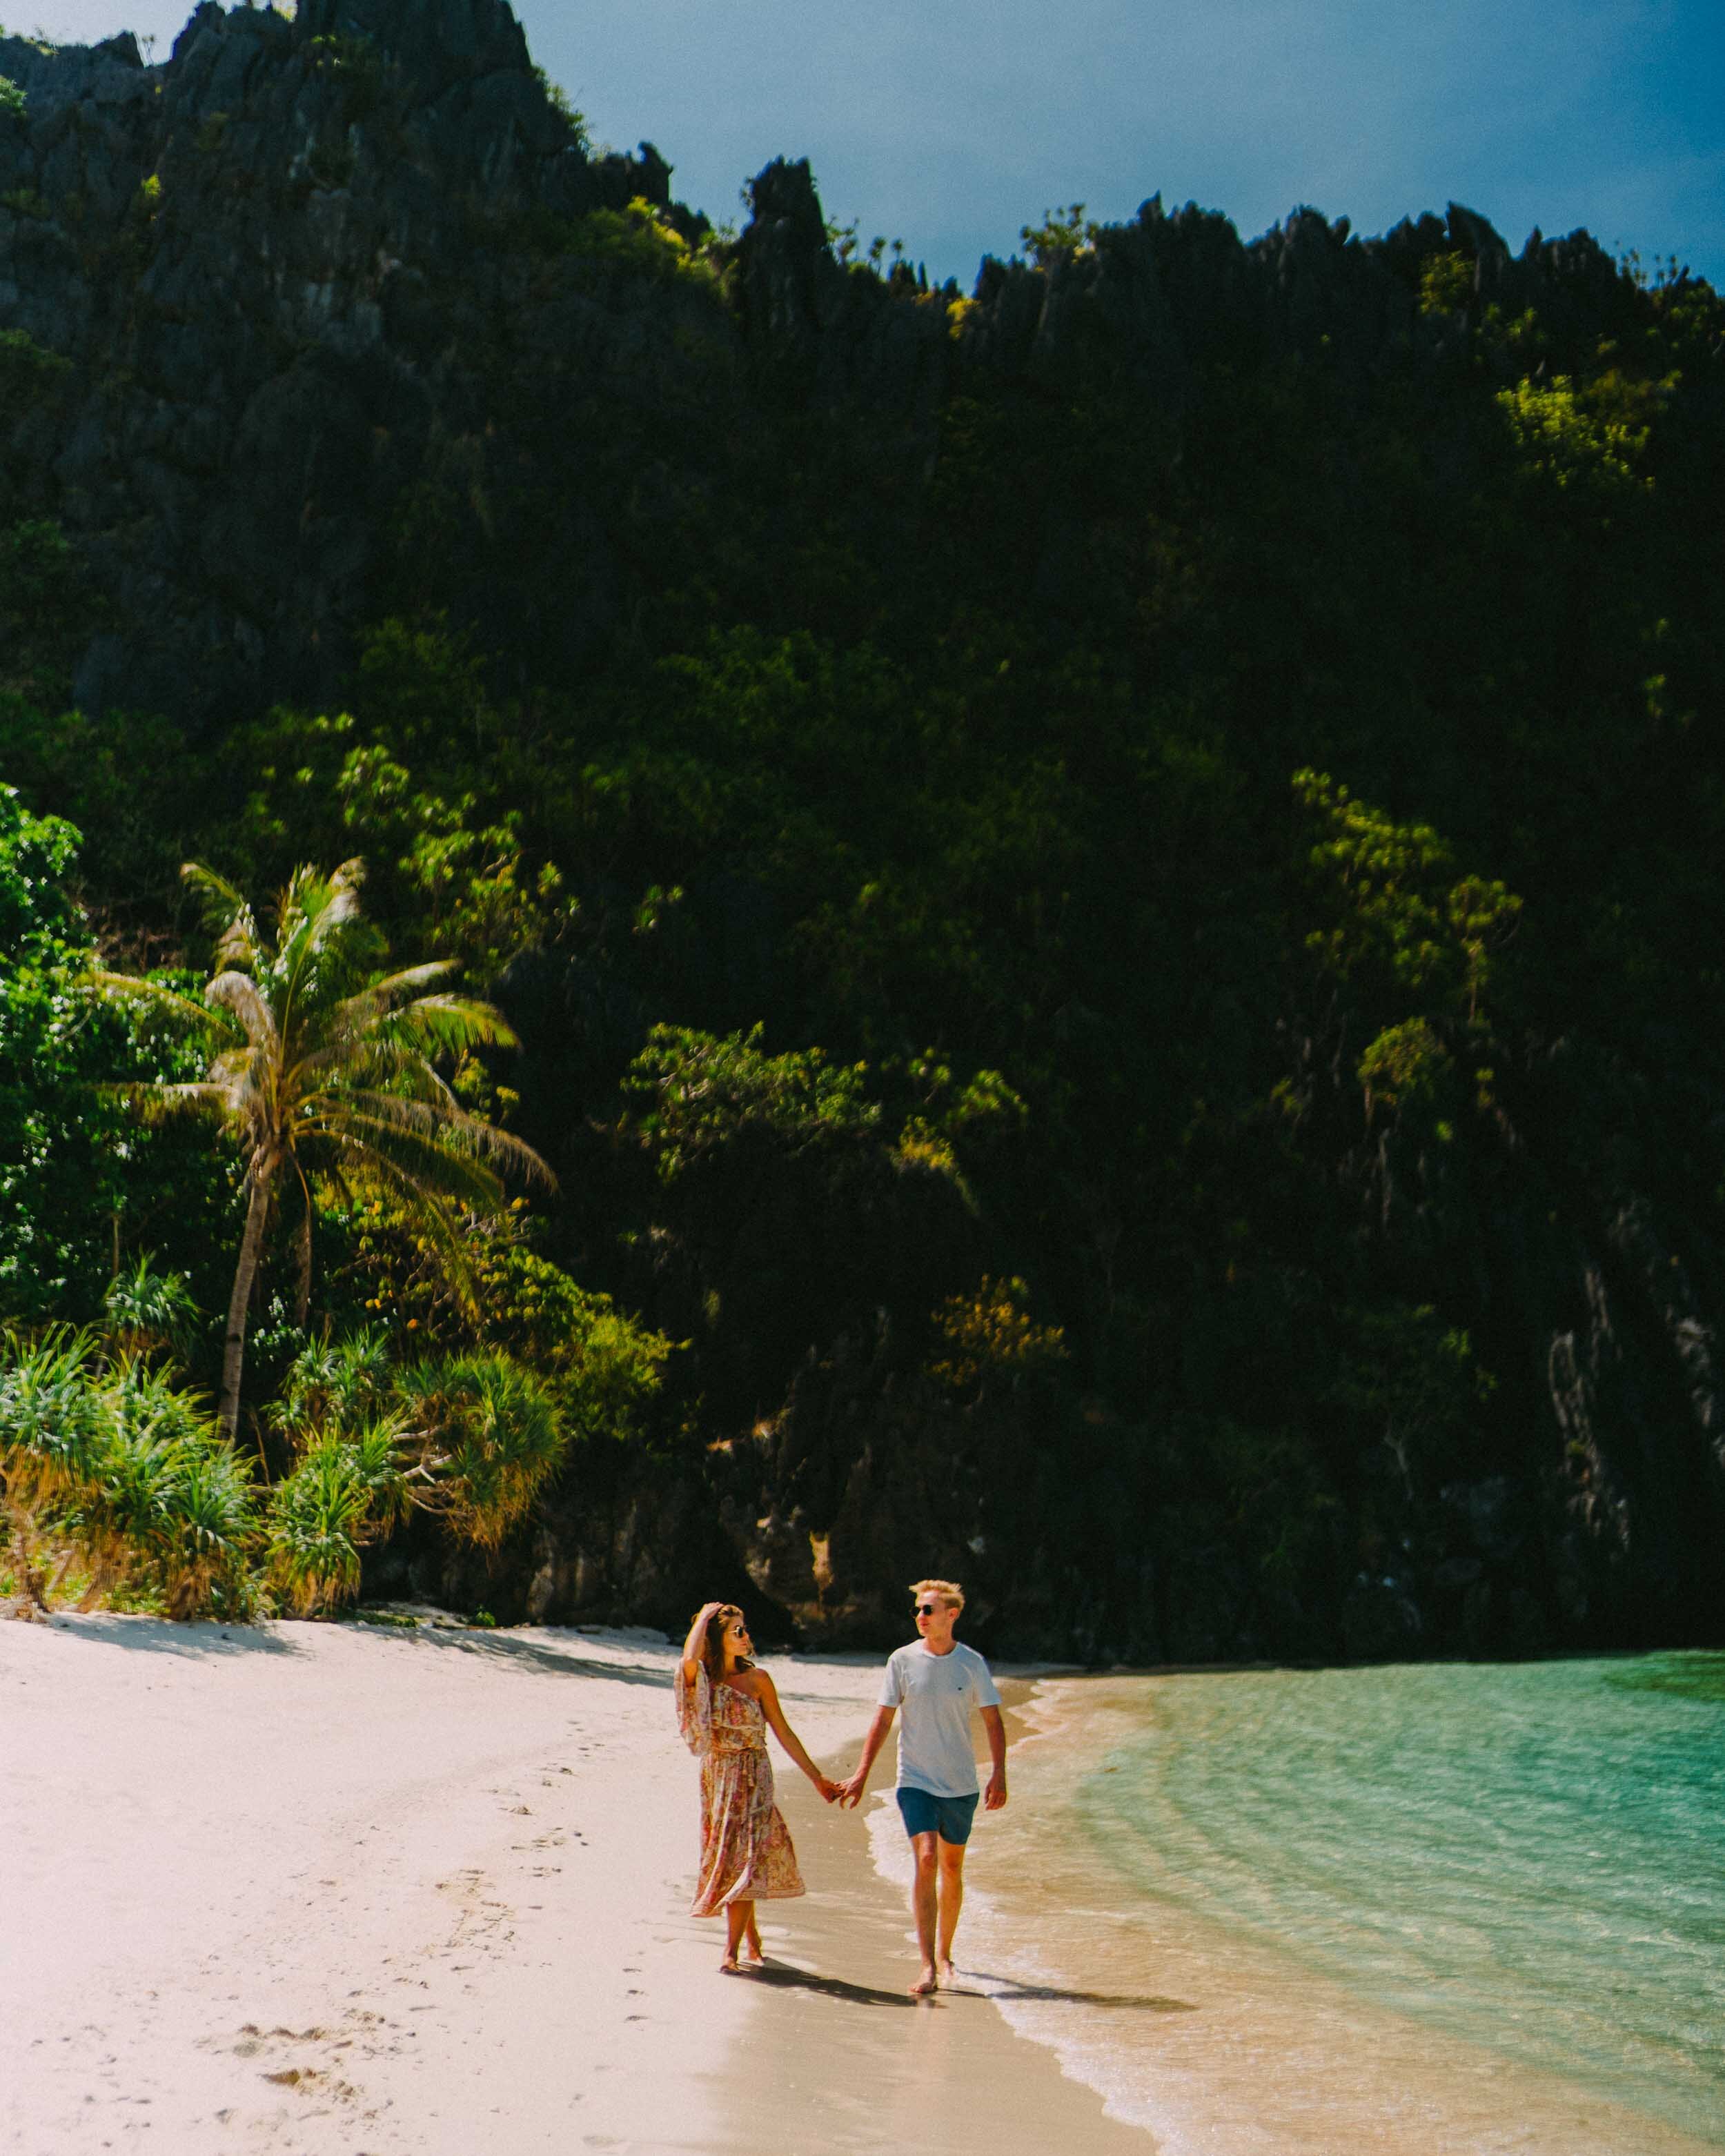 17 El Nido Philippines Couple Photography Honeymoon portraits in Palawan, March 2020. Travel couple photography in Southeast Asia x @hejguj.jpg